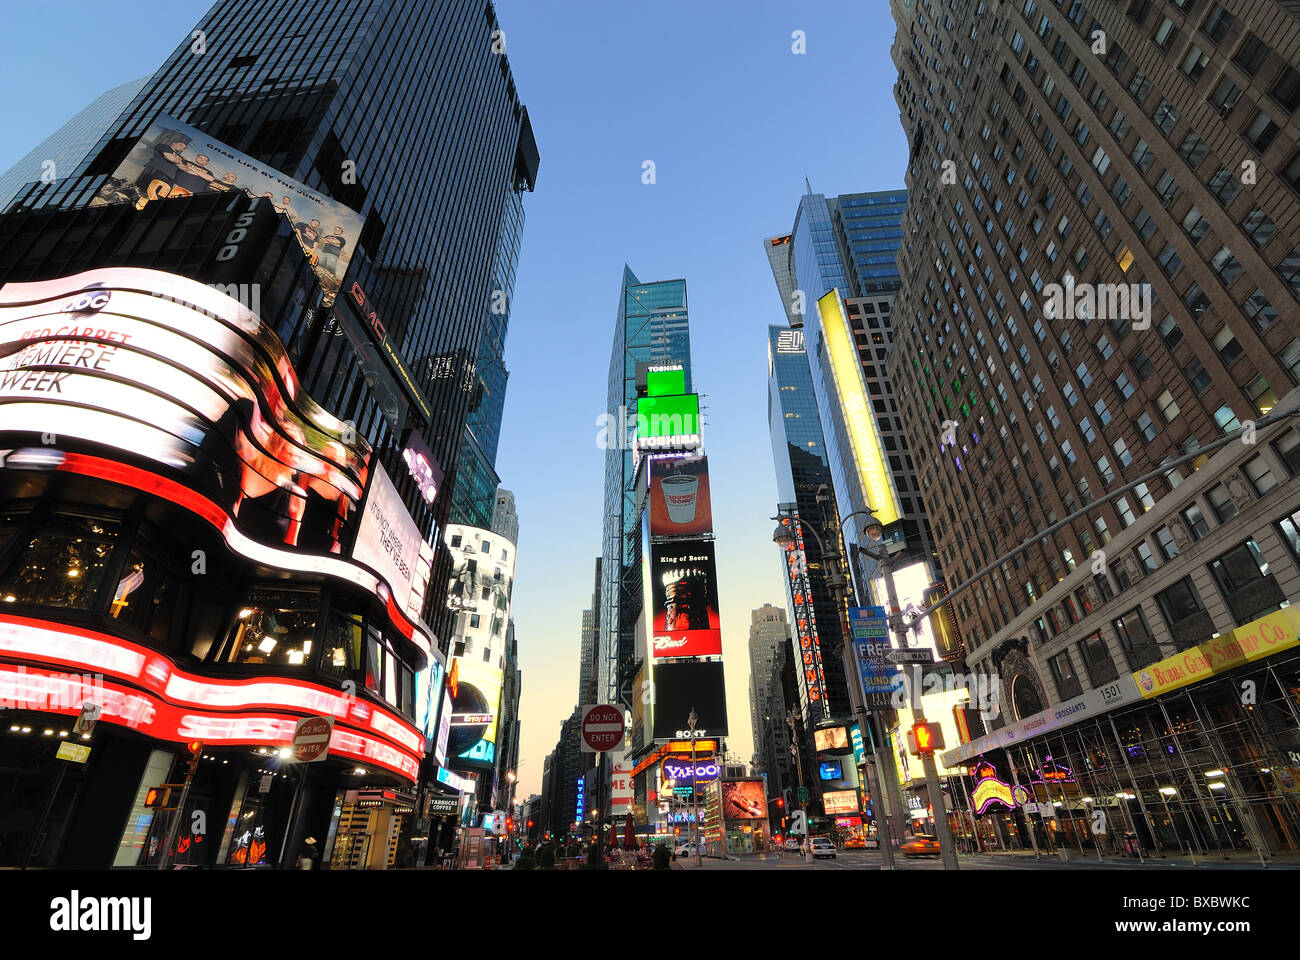 Storefronts and advertisements in Times Square New York City at dawn. Stock Photo